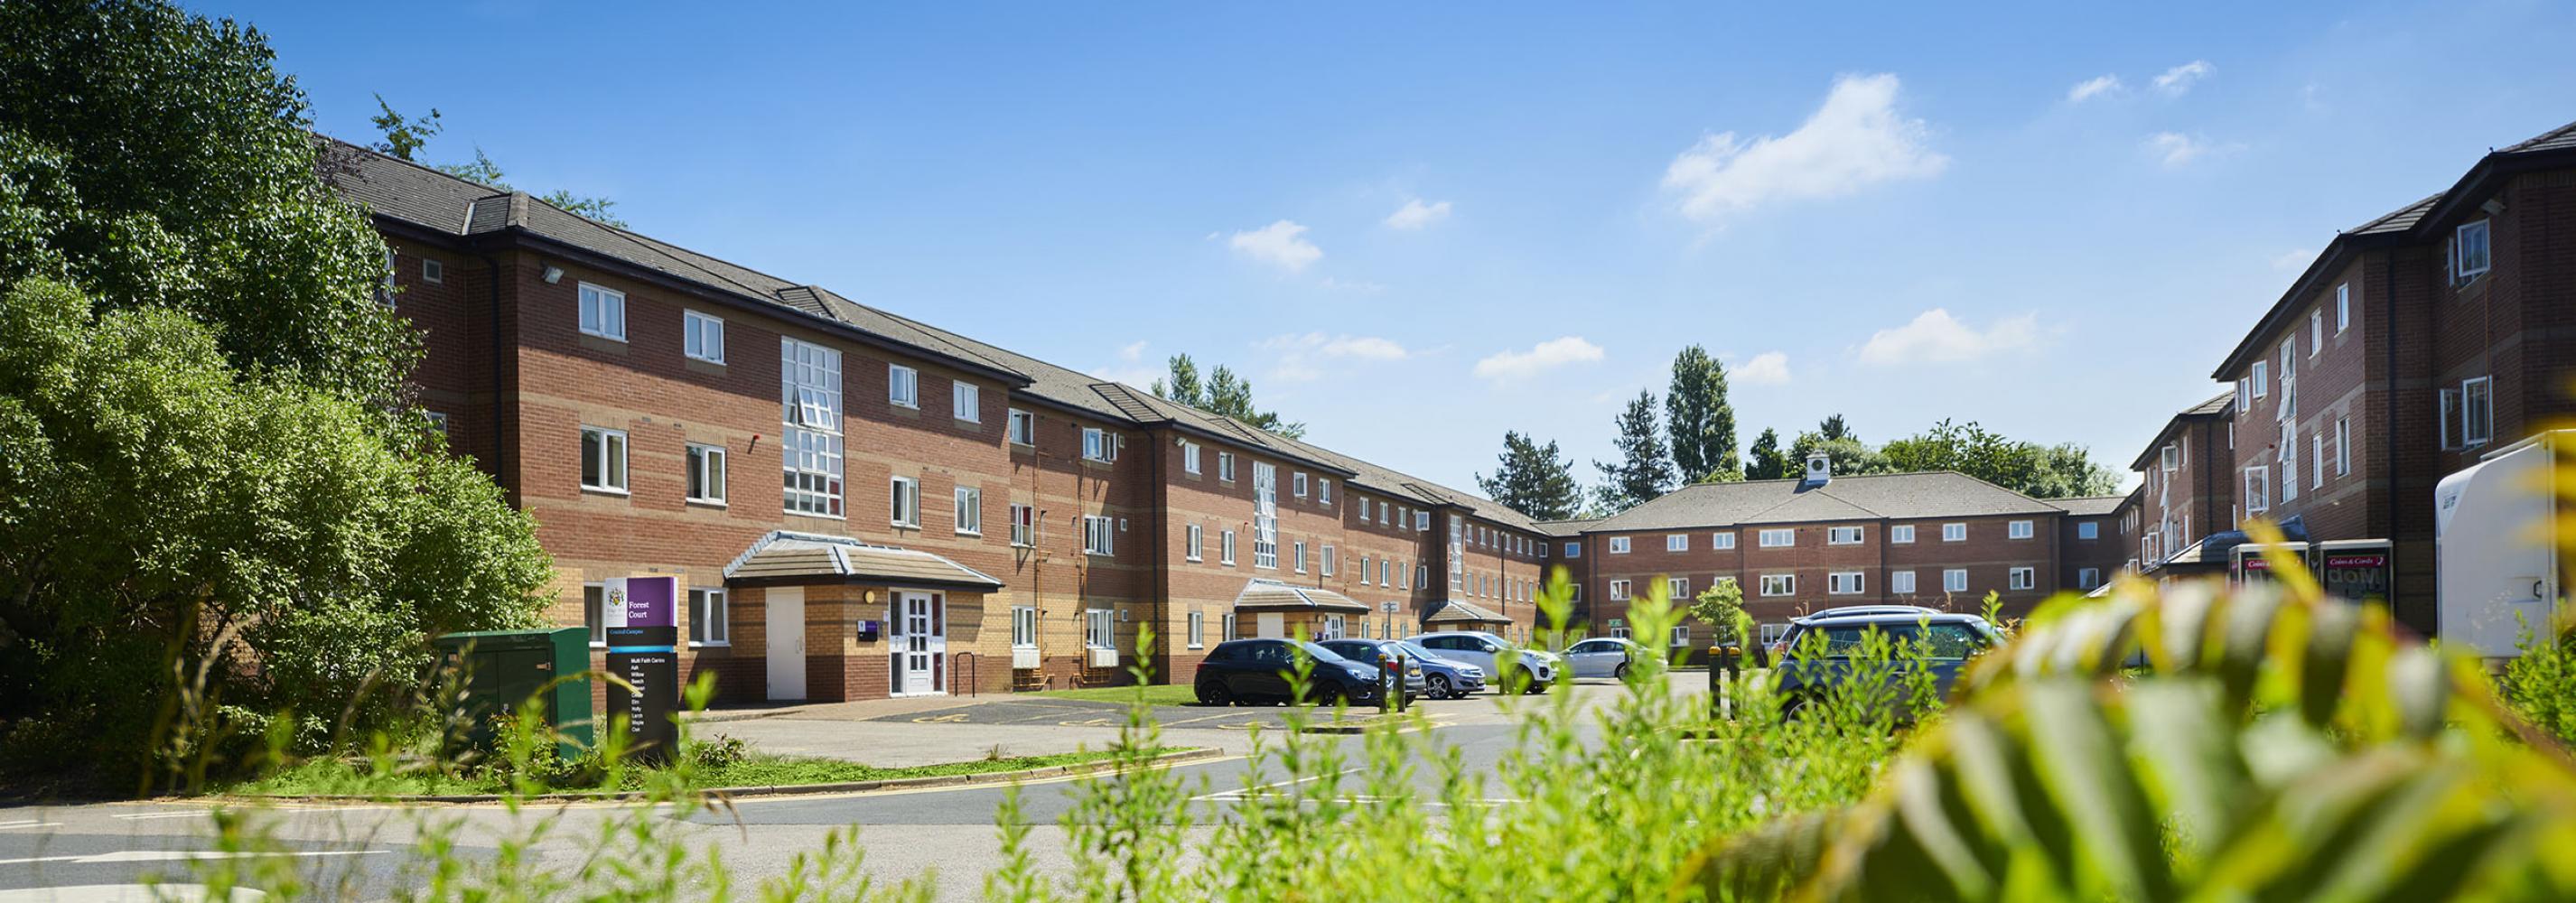 Exterior of Forest Court accommodation buildings.